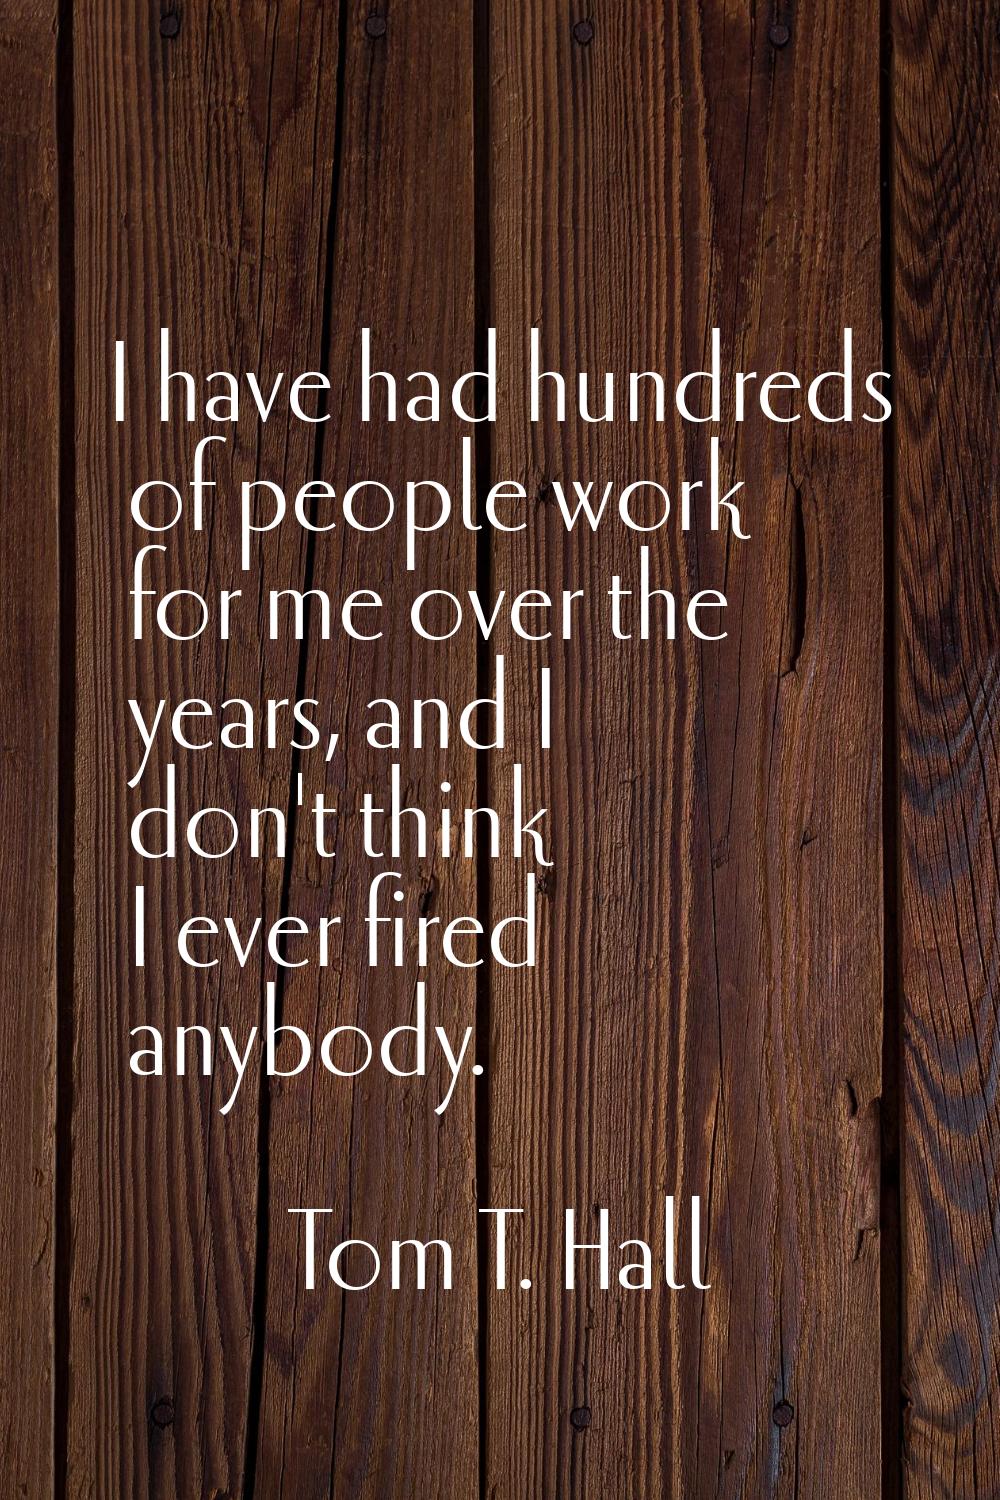 I have had hundreds of people work for me over the years, and I don't think I ever fired anybody.